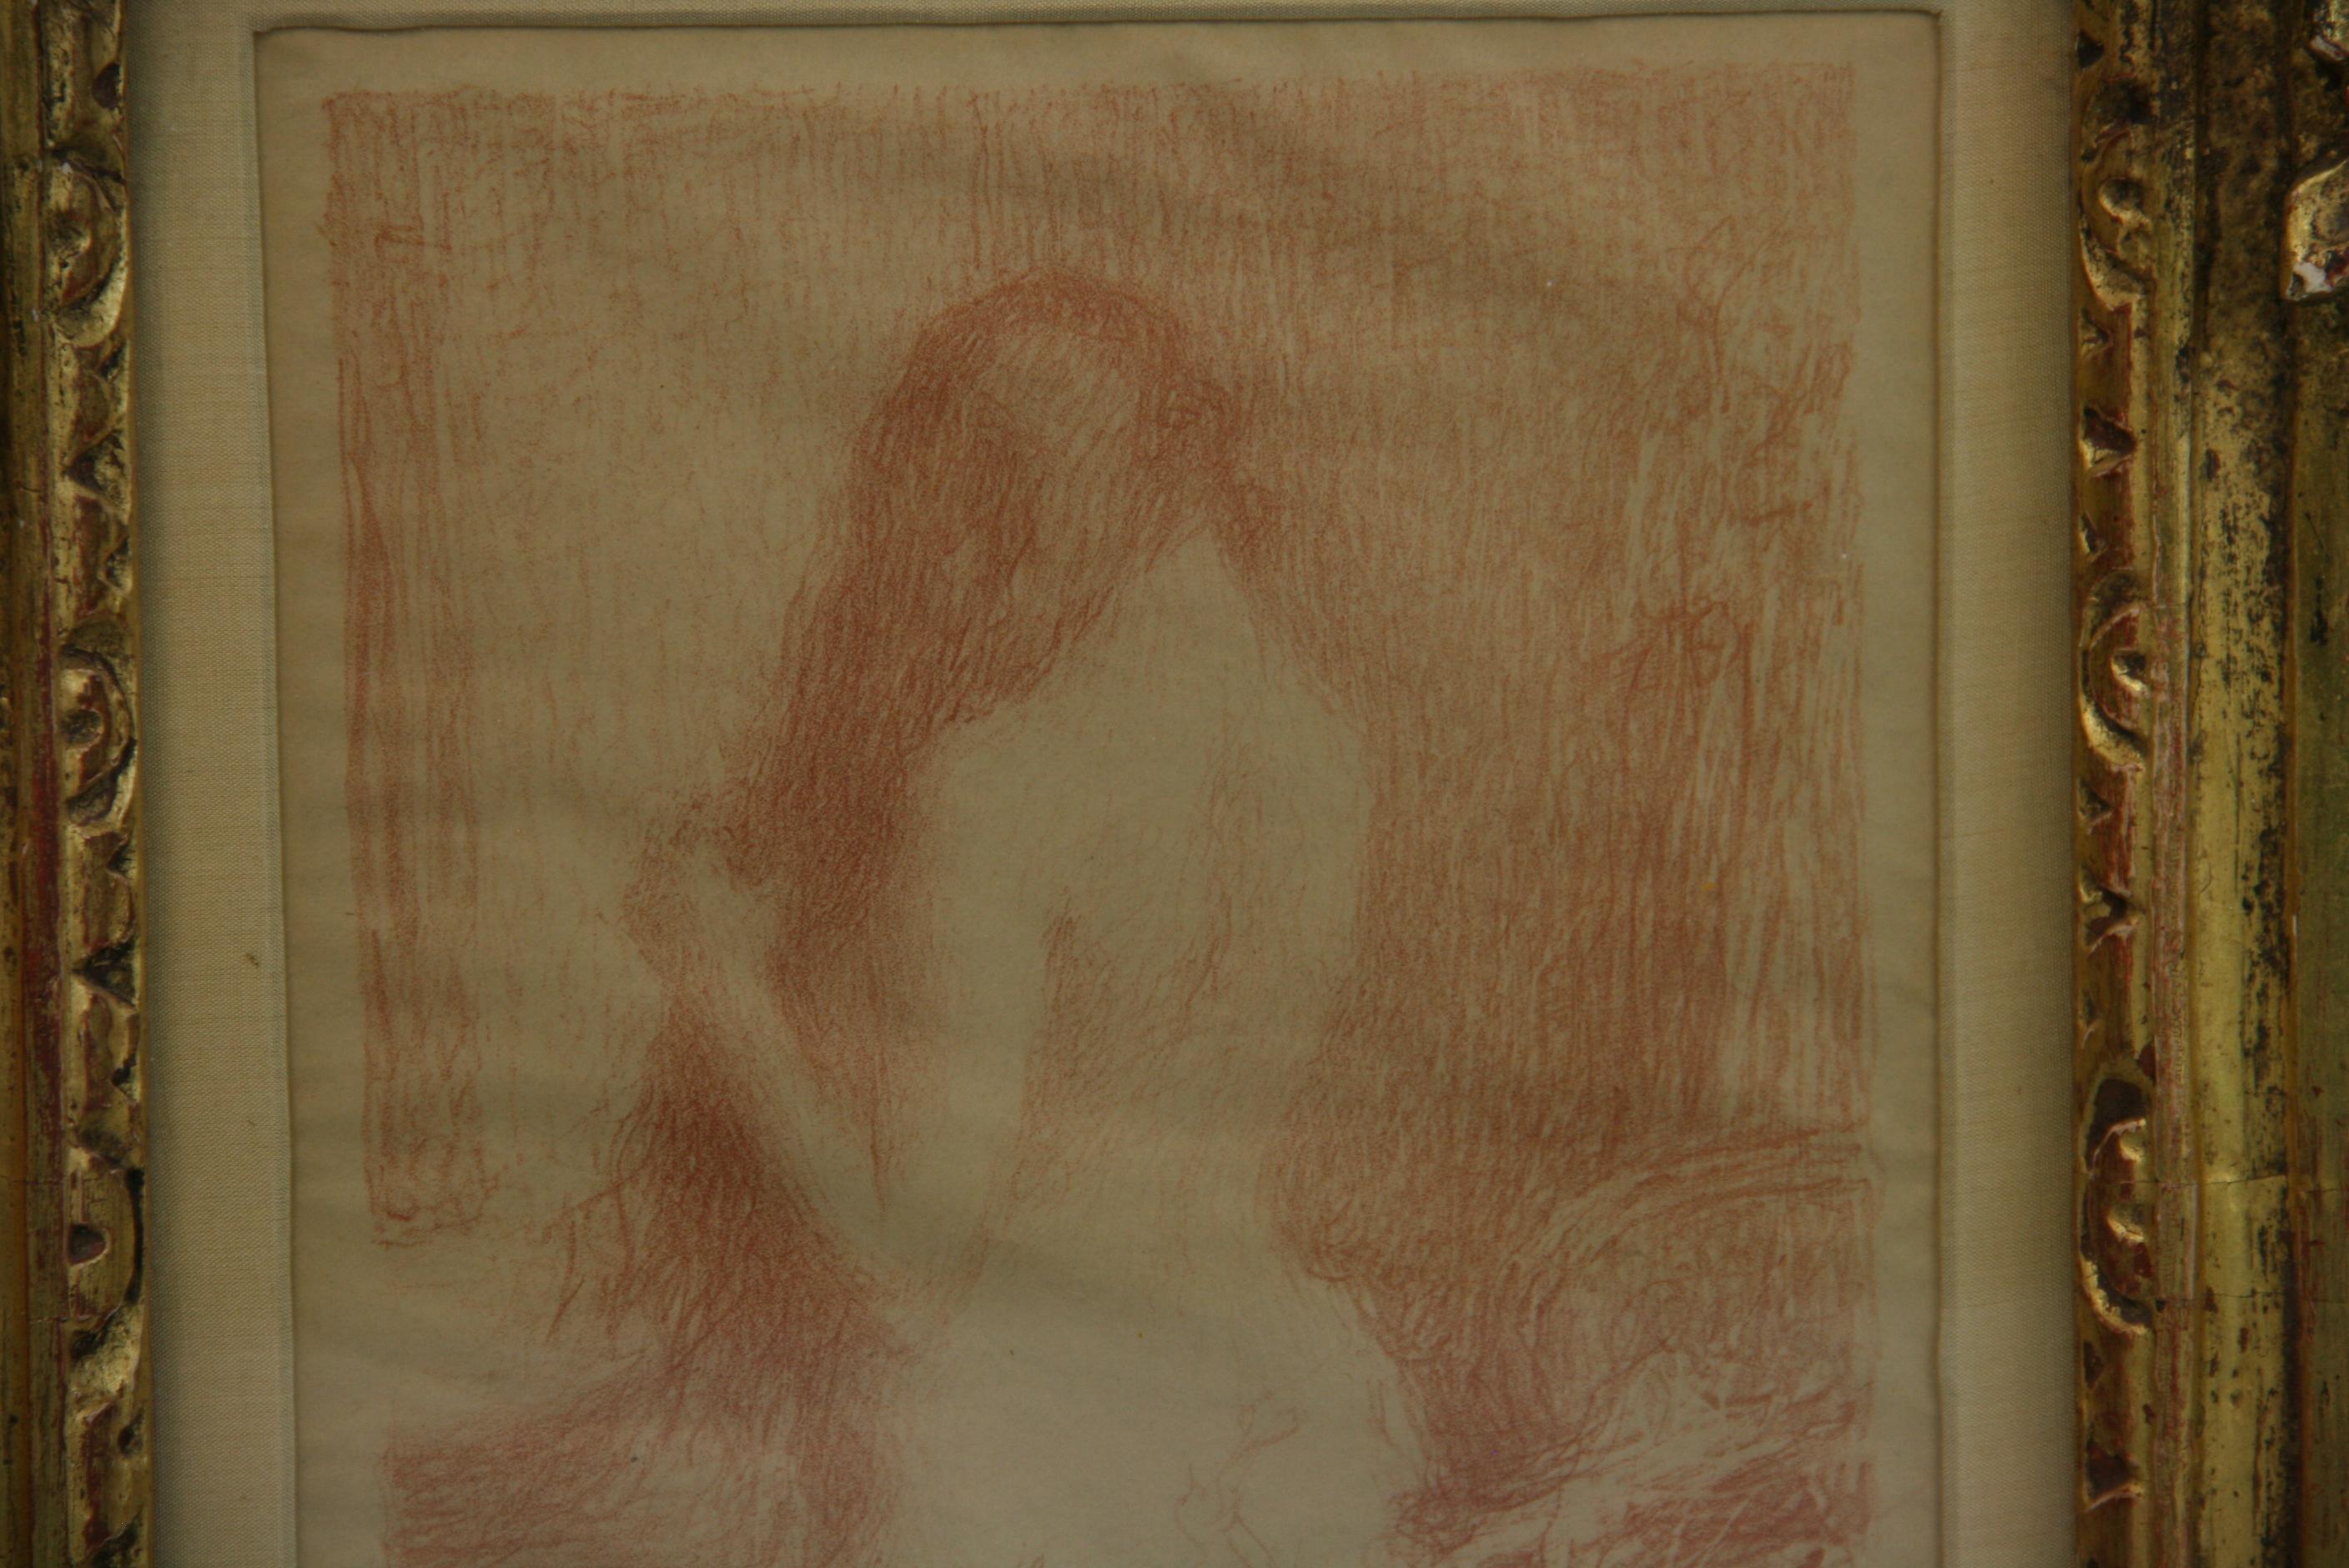 French Impressionist Drawing of a Nude Woman Combing Her Hair - Brown Figurative Art by Unknown